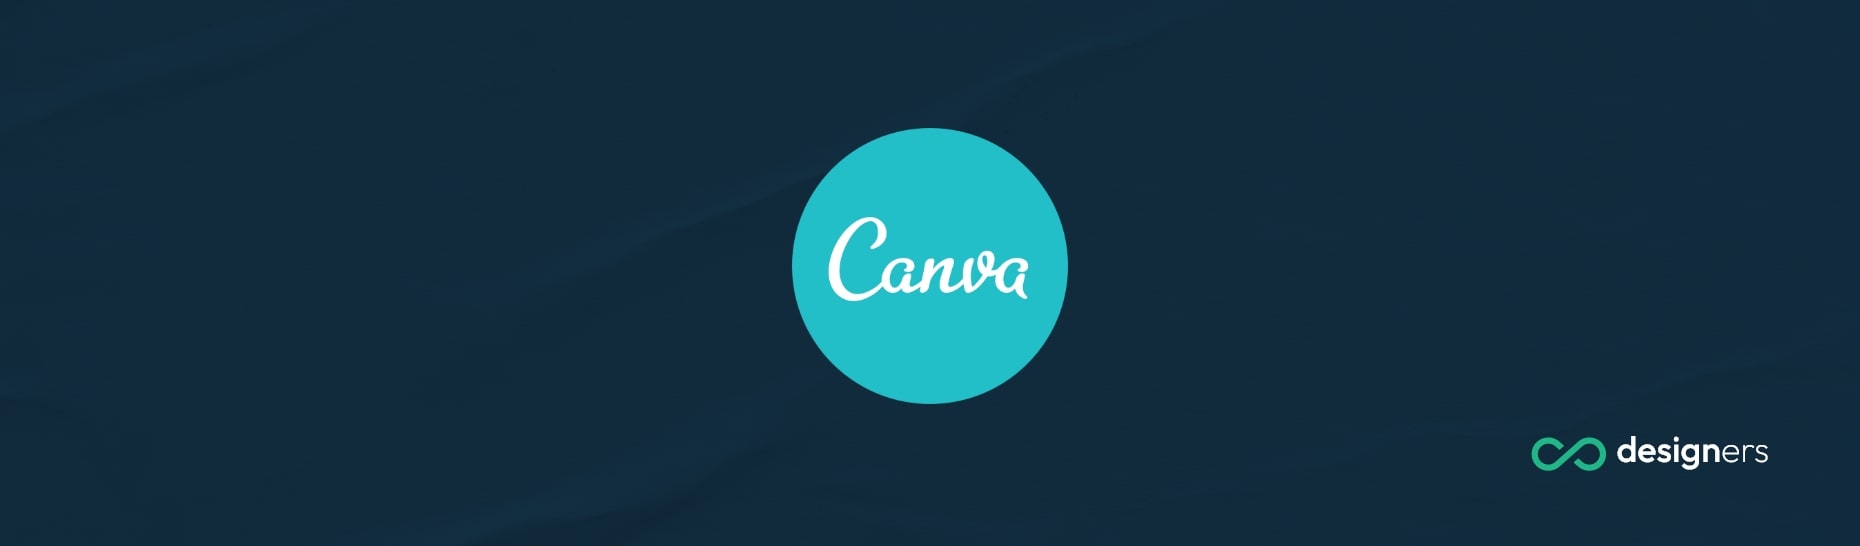 What Color Format Does Canva Use?